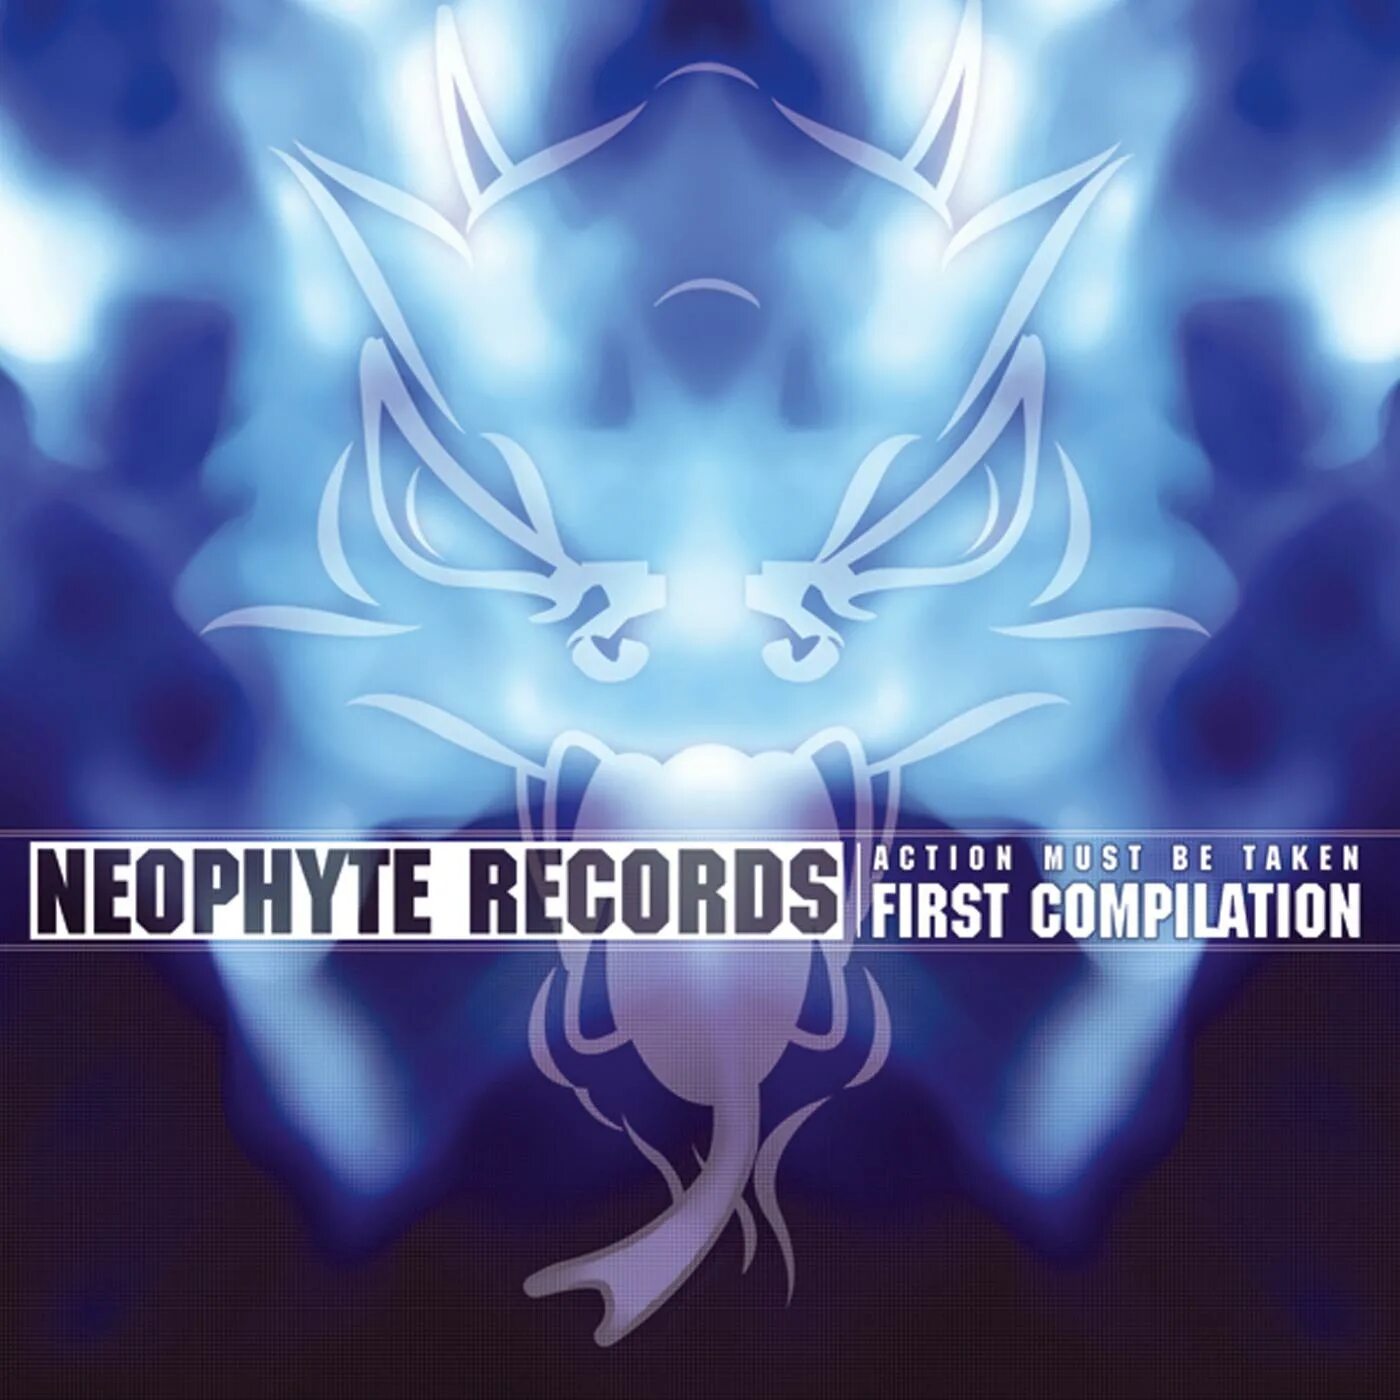 First compilation. DJ Neophyte. Neophyte & Panic. Neophyte records - Action must be taken - first Compilation (2002) 2cd. Bounce 2 dizrelianze Frenchcore Remix restrained, Neophyte.